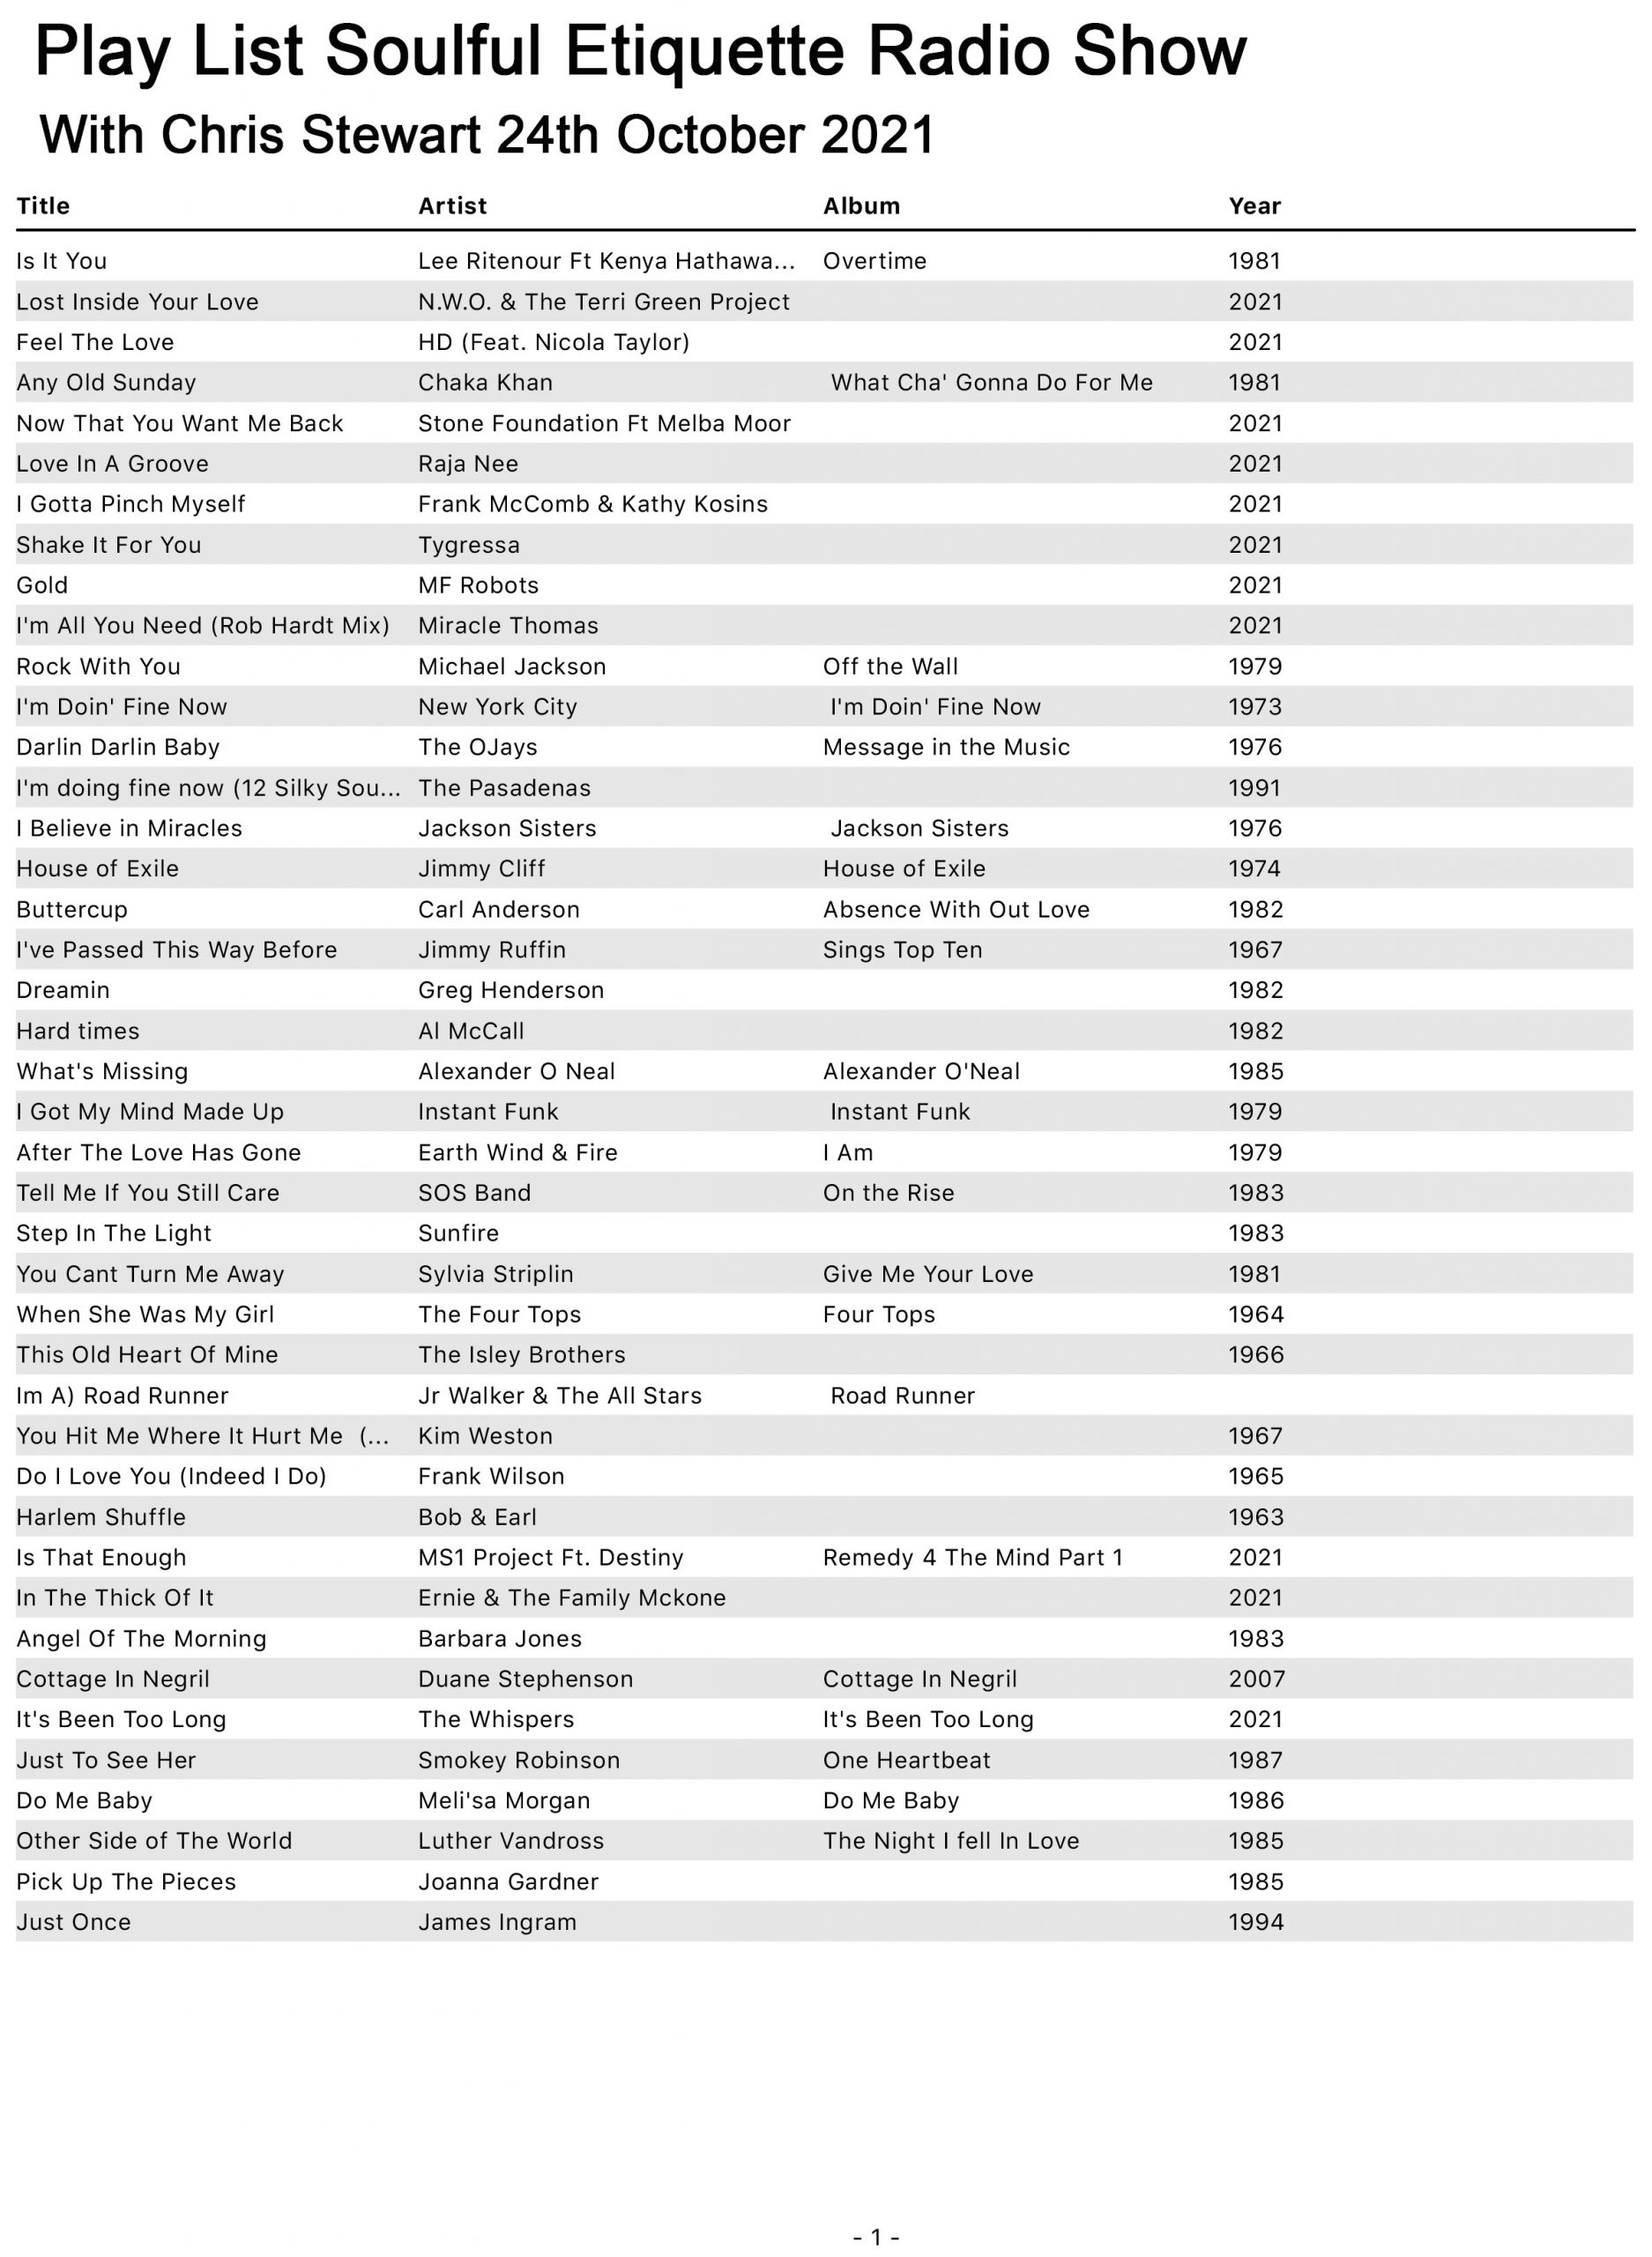 Soulful Etiquette Radio Show Play List for 24th October 2021